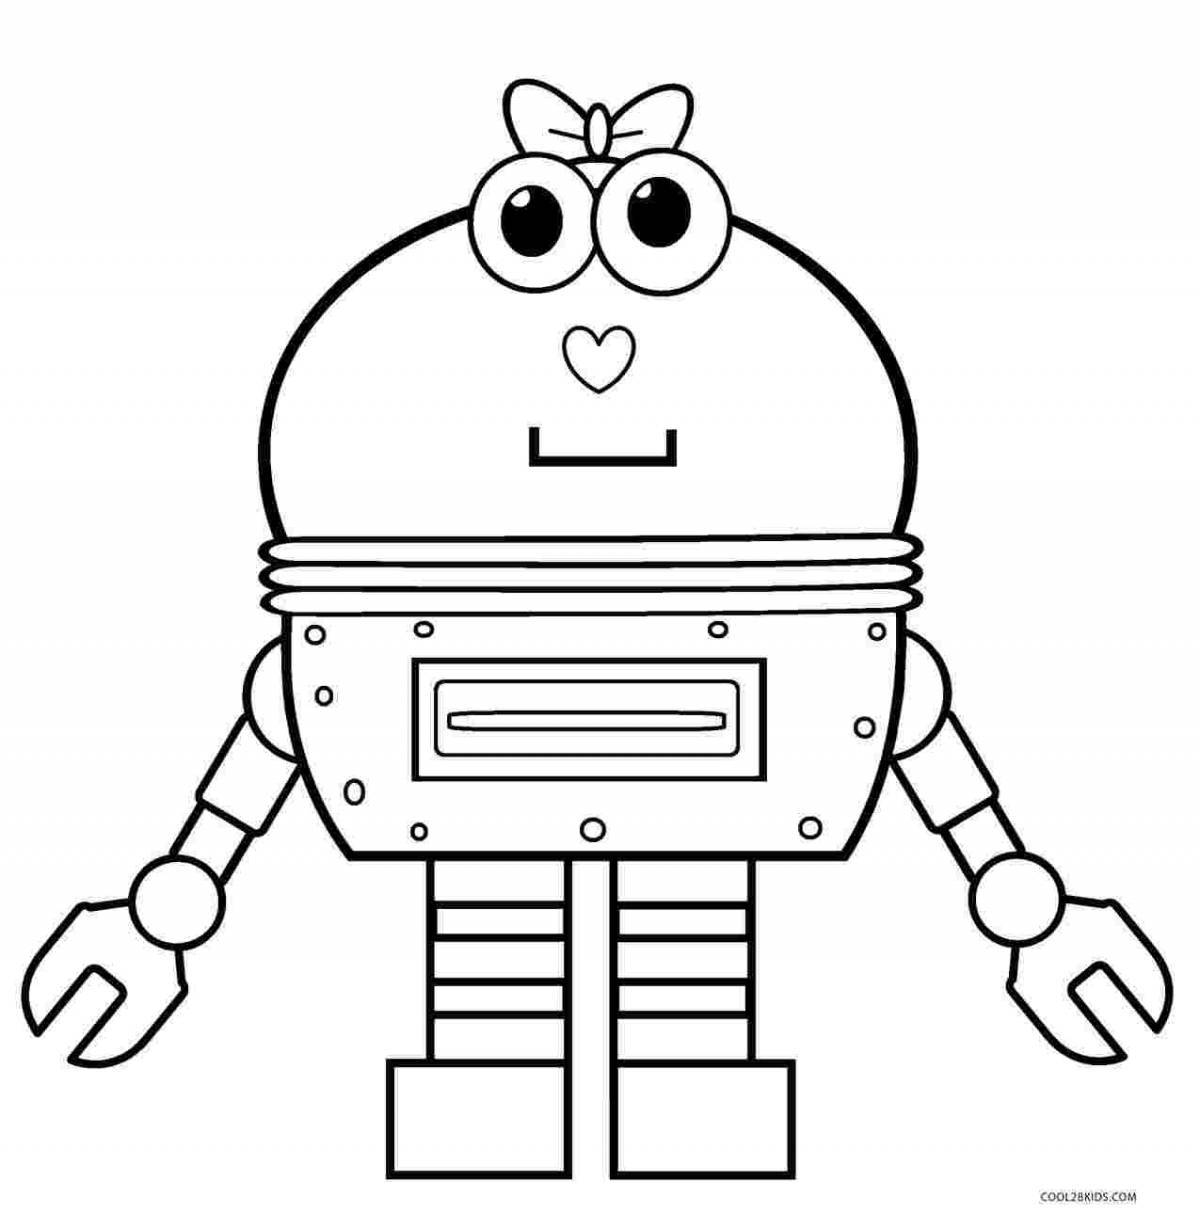 Robots for children 3 4 years old #23